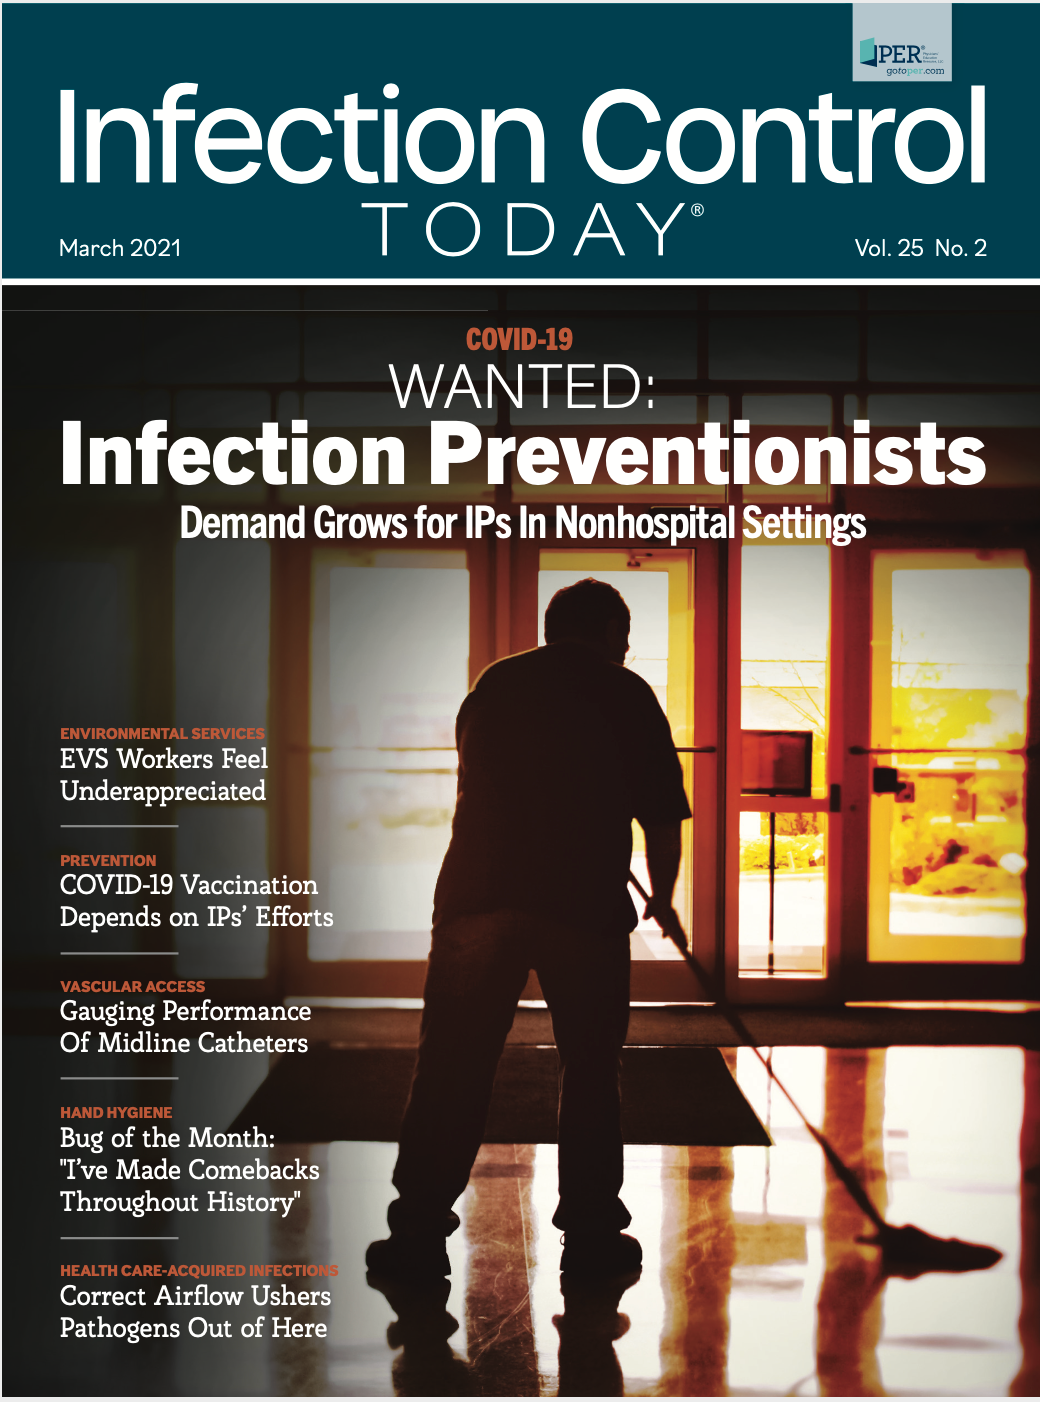 Infection Control Today, March 2021 (Vol. 25 No. 2)